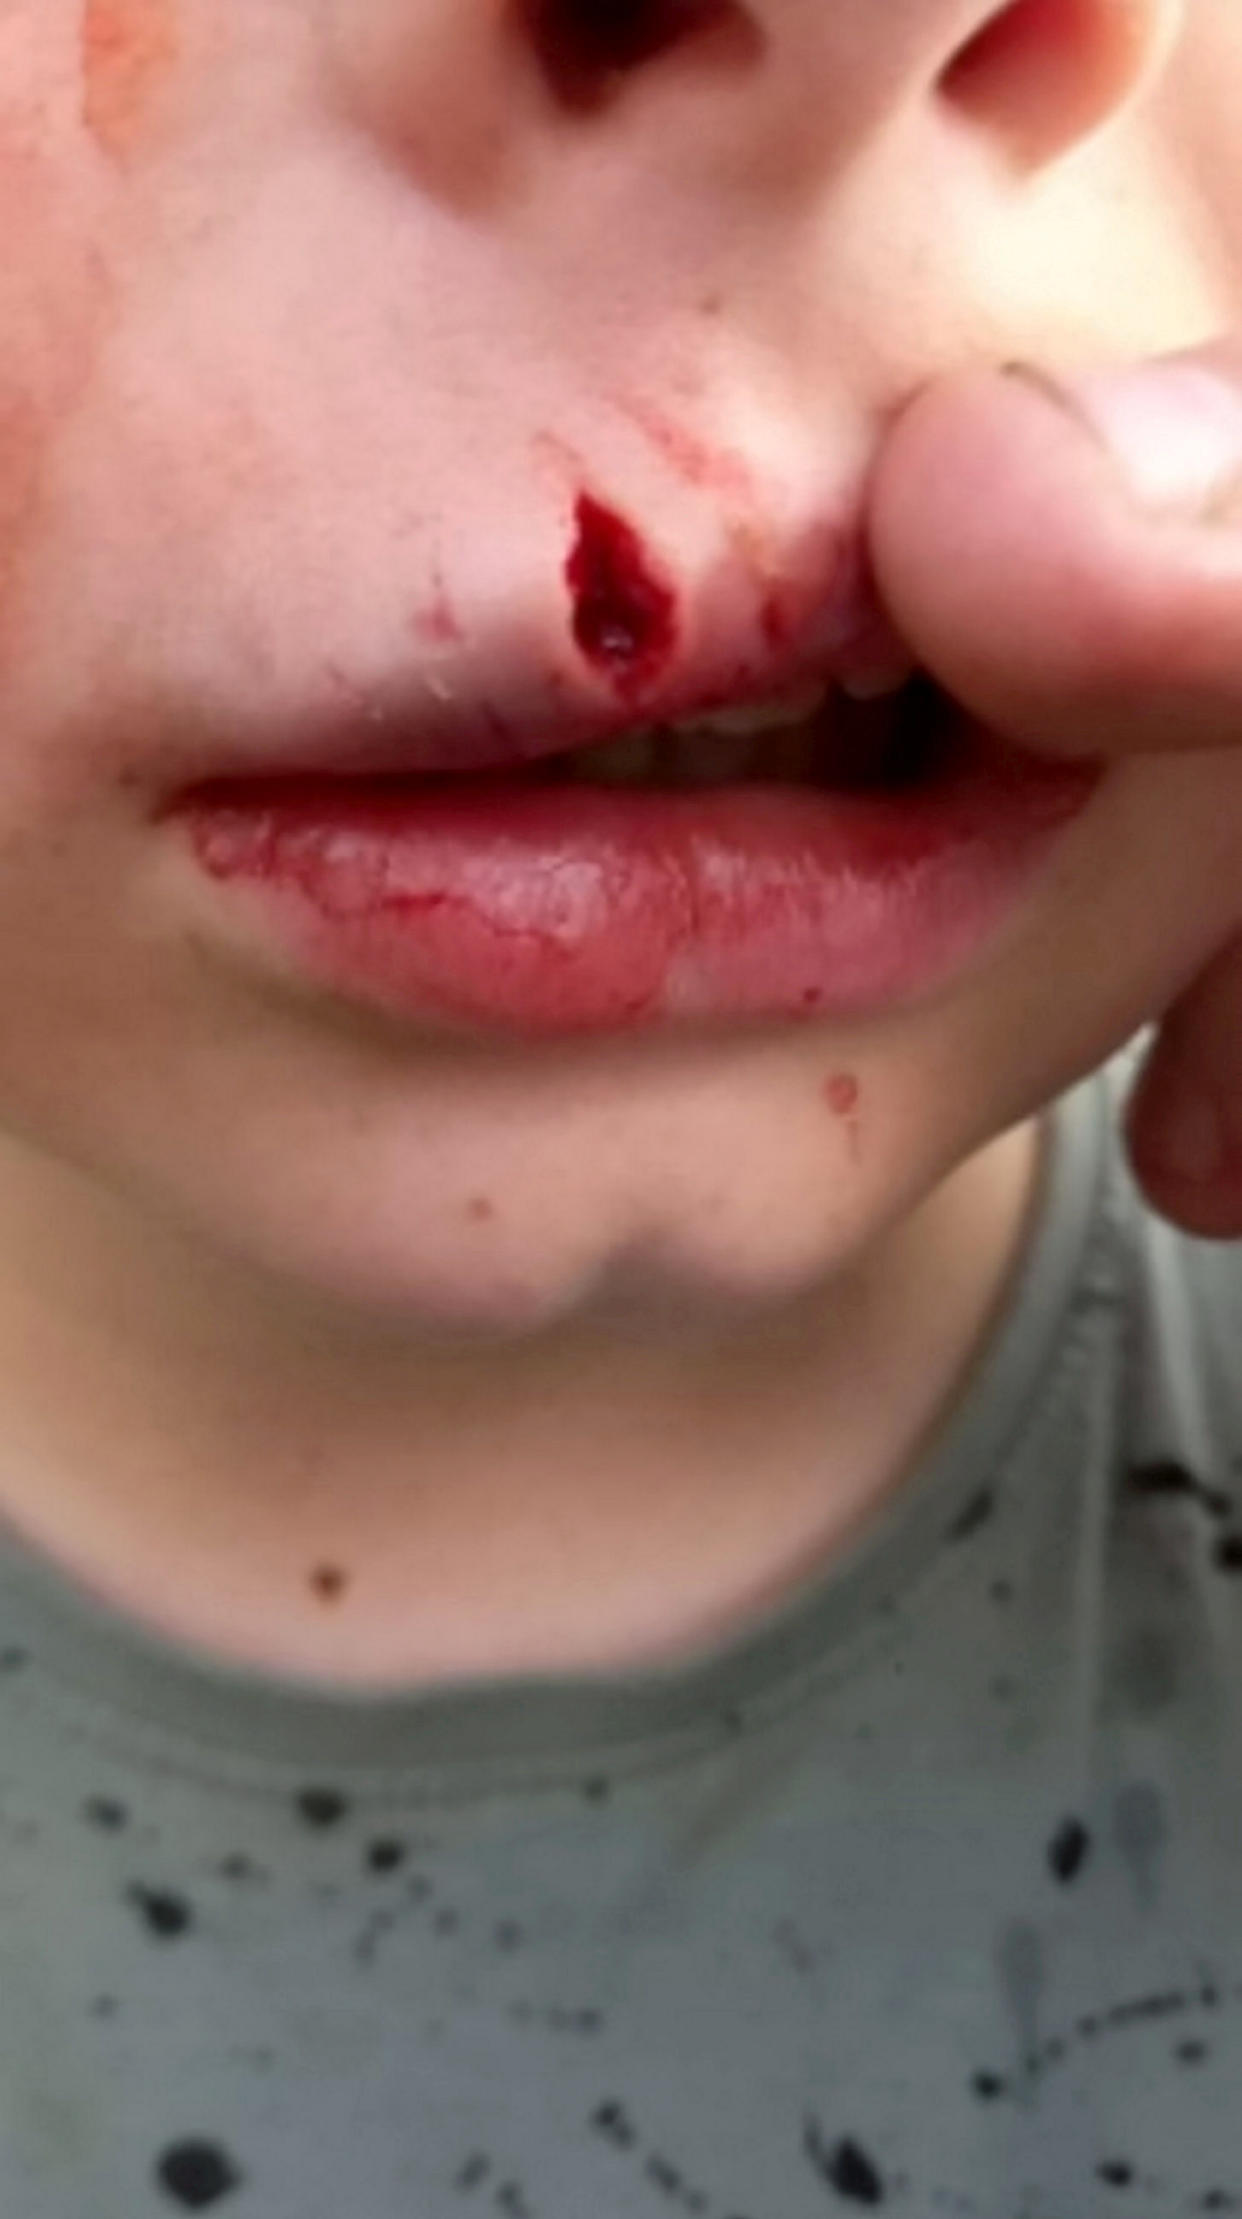 Police are appealing for information after a nine-year-old boy was bitten by a dog in Stoke-on-Trent, Staffs.  See SWNS story SWMDbite.  At approximately 5:45pm on Wednesday 20 April, a boy was bitten on the face by a dog on Belgrave Road, Dresden, at the rear of Belgrave St. Bartholomew’s Academy.  He suffered facial injuries and was transported to hospital for treatment.  Police are conducting enquiries locally and would like to speak to the owner of a large brown/ginger coloured Staffordshire Bull Terrier.  The suspected owner of the dog is described as white woman, roughly 5ft 6in tall, aged late 30s to early 40s and of a slim build with light brown shoulder length hair. She was wearing sunglasses on her head at the time of the incident. 